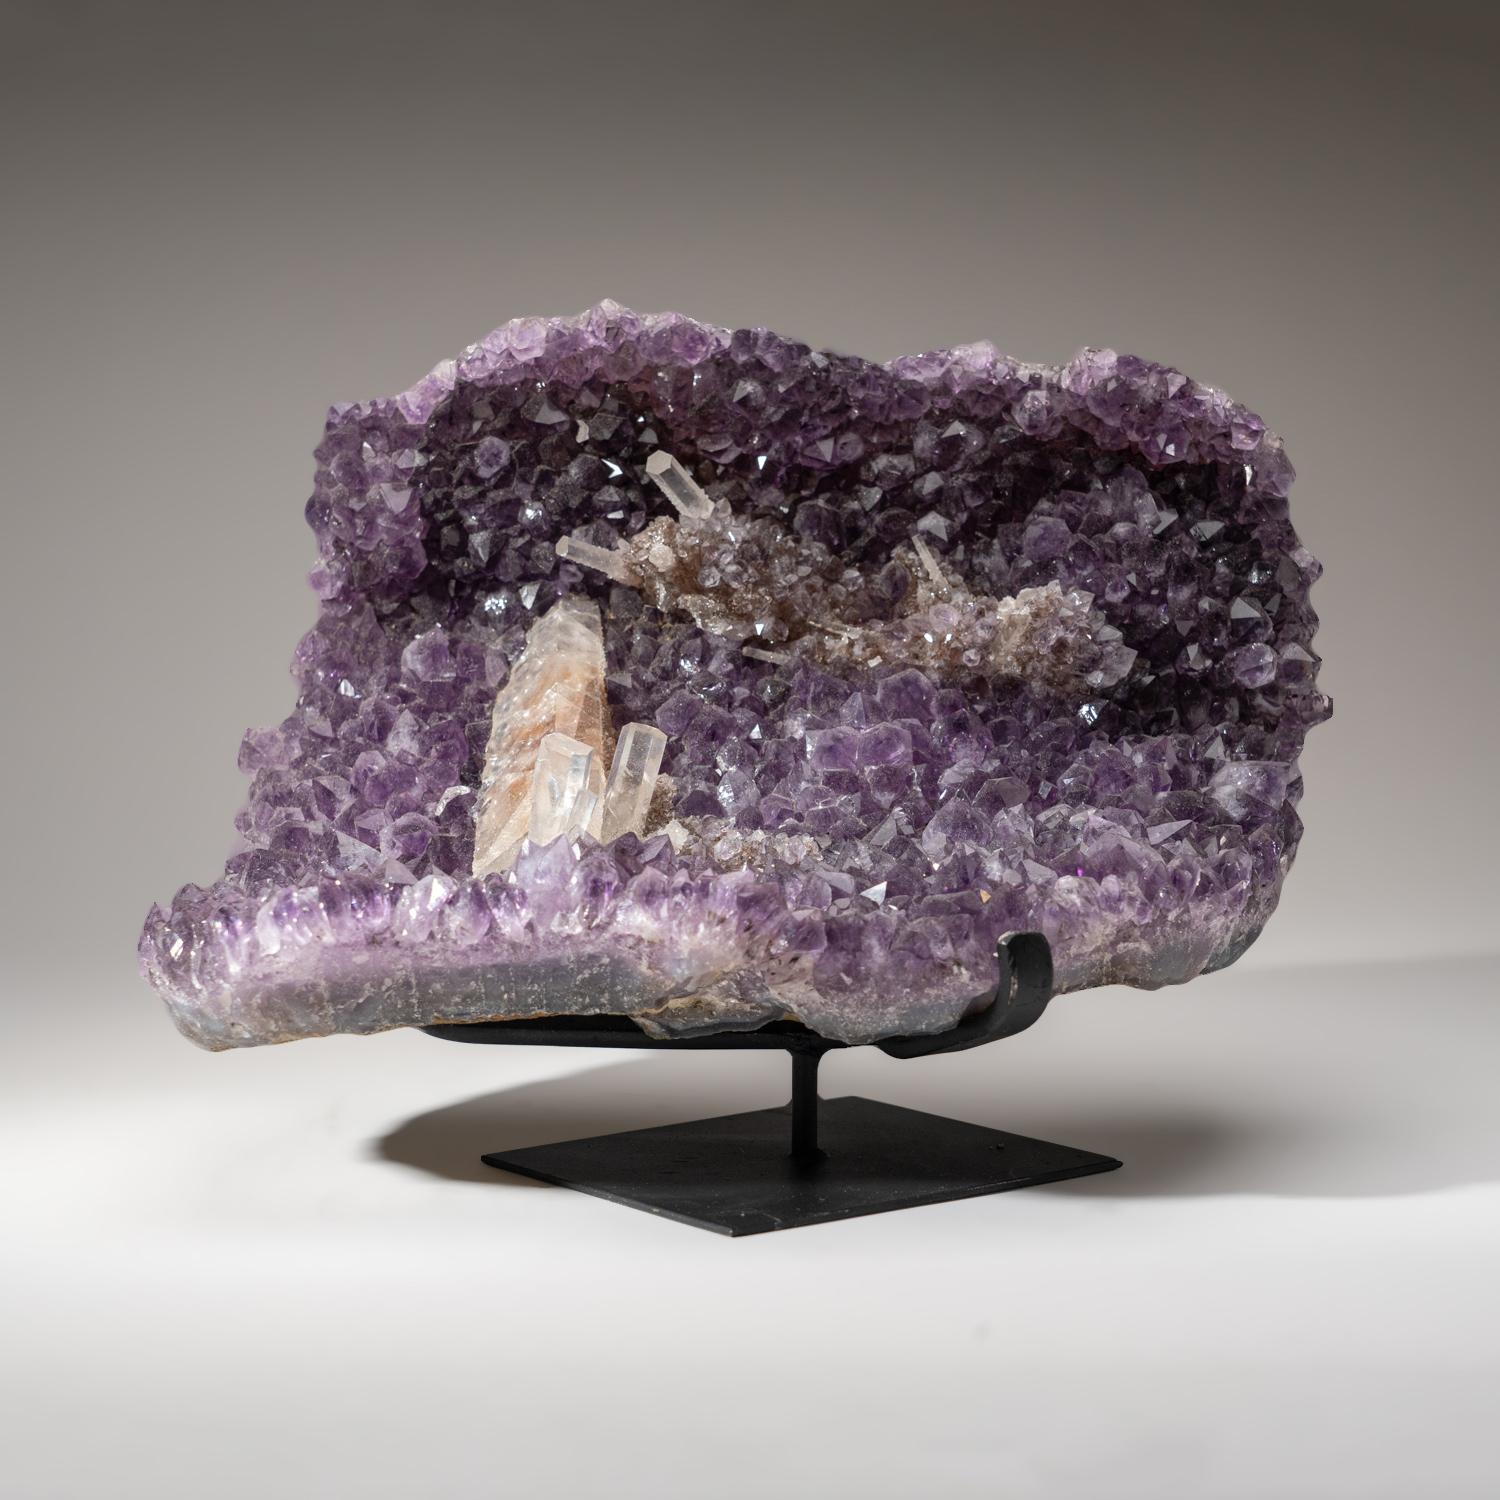 Contemporary Genuine Amethyst Crystal Cluster with Calcite on Stand from Uruguay (16 lbs) For Sale